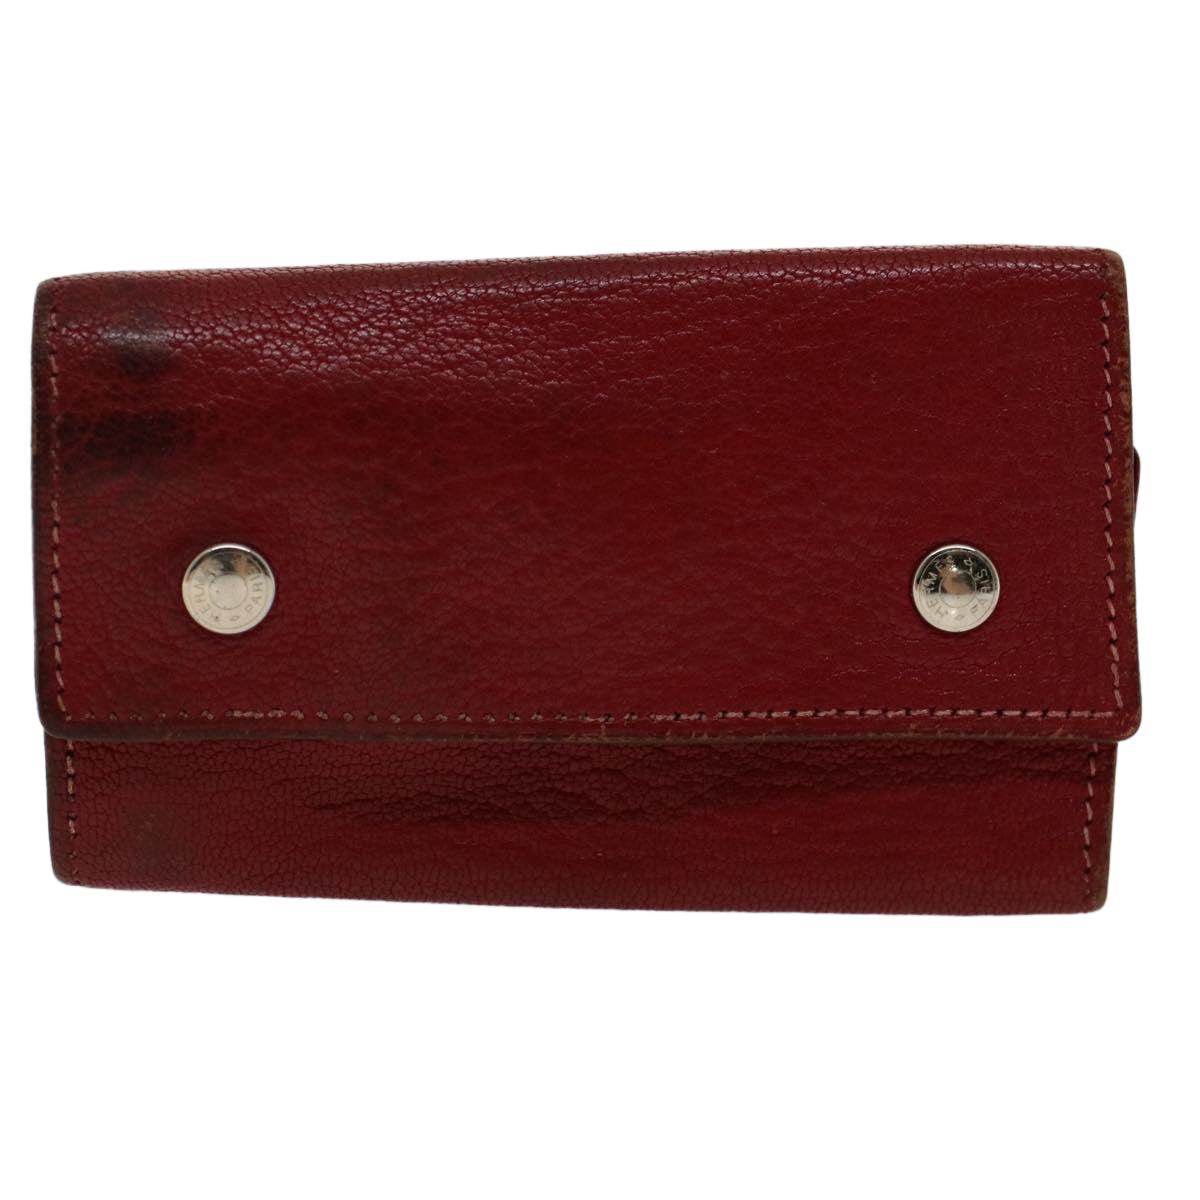 HERMES Key Case Leather Red Auth 50857 - 0